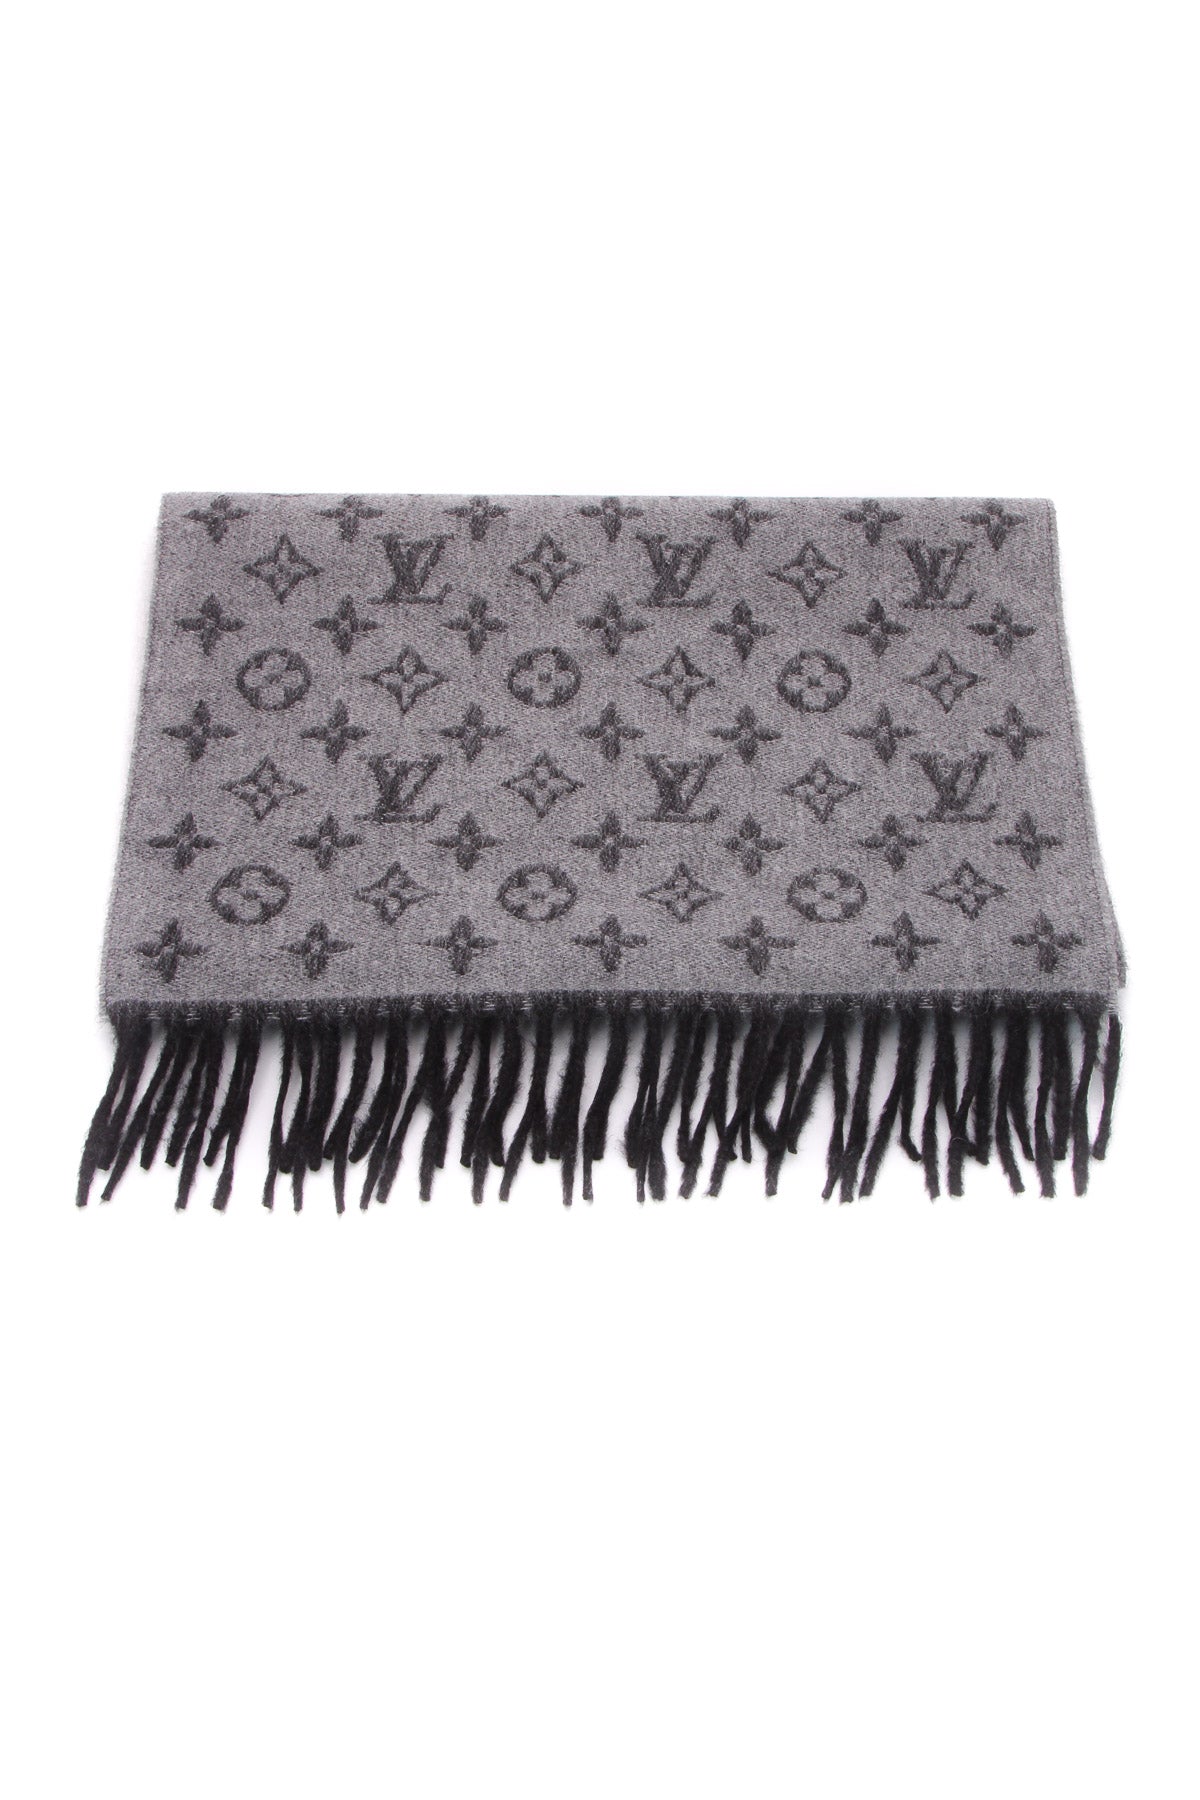 Which Color Would You Pick For The Louis Vuitton Monogram Shawl?  Louis  vuitton monogram shawl, Louis vuitton scarf, Louis vuitton handbags